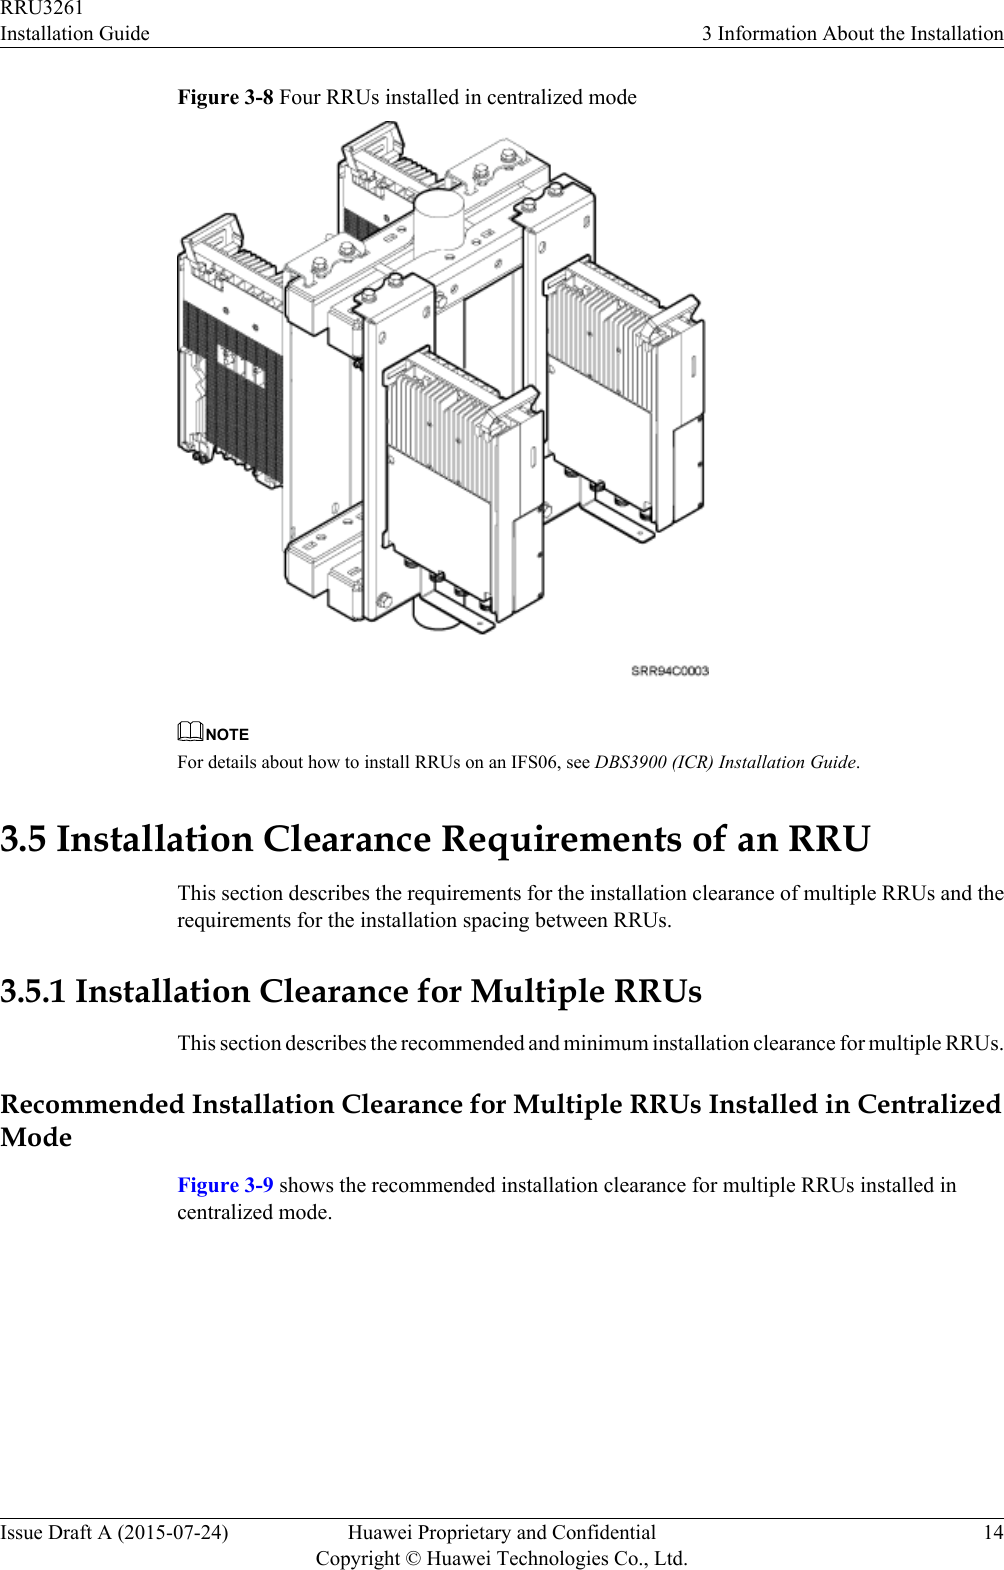 Figure 3-8 Four RRUs installed in centralized modeNOTEFor details about how to install RRUs on an IFS06, see DBS3900 (ICR) Installation Guide.3.5 Installation Clearance Requirements of an RRUThis section describes the requirements for the installation clearance of multiple RRUs and therequirements for the installation spacing between RRUs.3.5.1 Installation Clearance for Multiple RRUsThis section describes the recommended and minimum installation clearance for multiple RRUs.Recommended Installation Clearance for Multiple RRUs Installed in CentralizedModeFigure 3-9 shows the recommended installation clearance for multiple RRUs installed incentralized mode.RRU3261Installation Guide 3 Information About the InstallationIssue Draft A (2015-07-24) Huawei Proprietary and ConfidentialCopyright © Huawei Technologies Co., Ltd.14